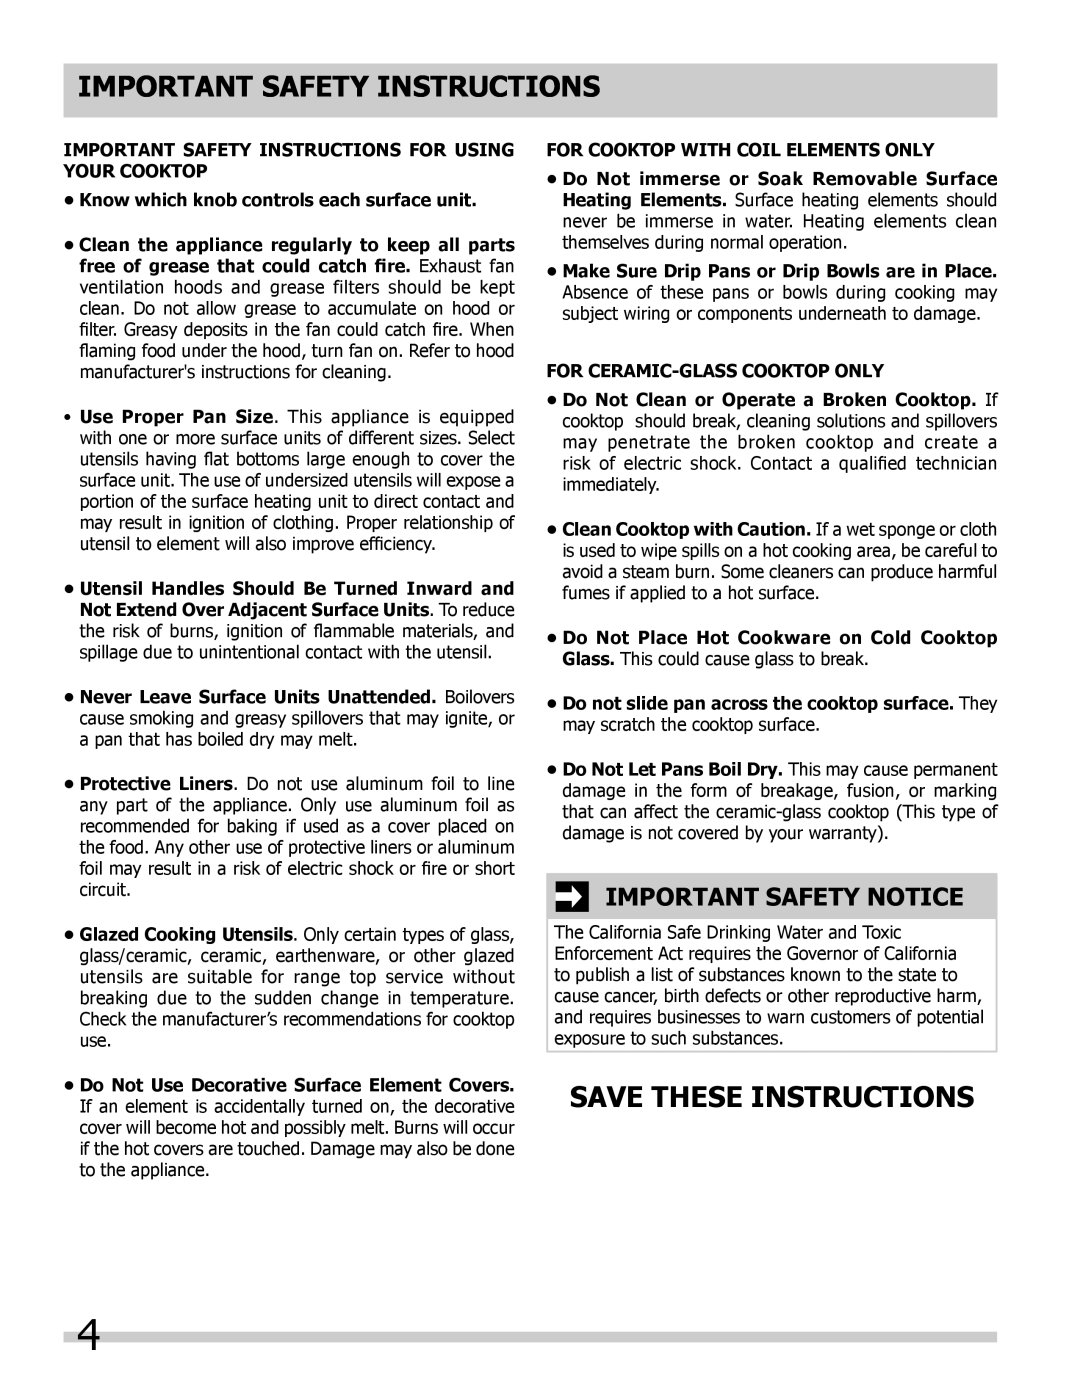 Frigidaire FFEC2605LW, FFEC3024LW manual Save these instructions, Important Safety Notice, Important Safety Instructions 